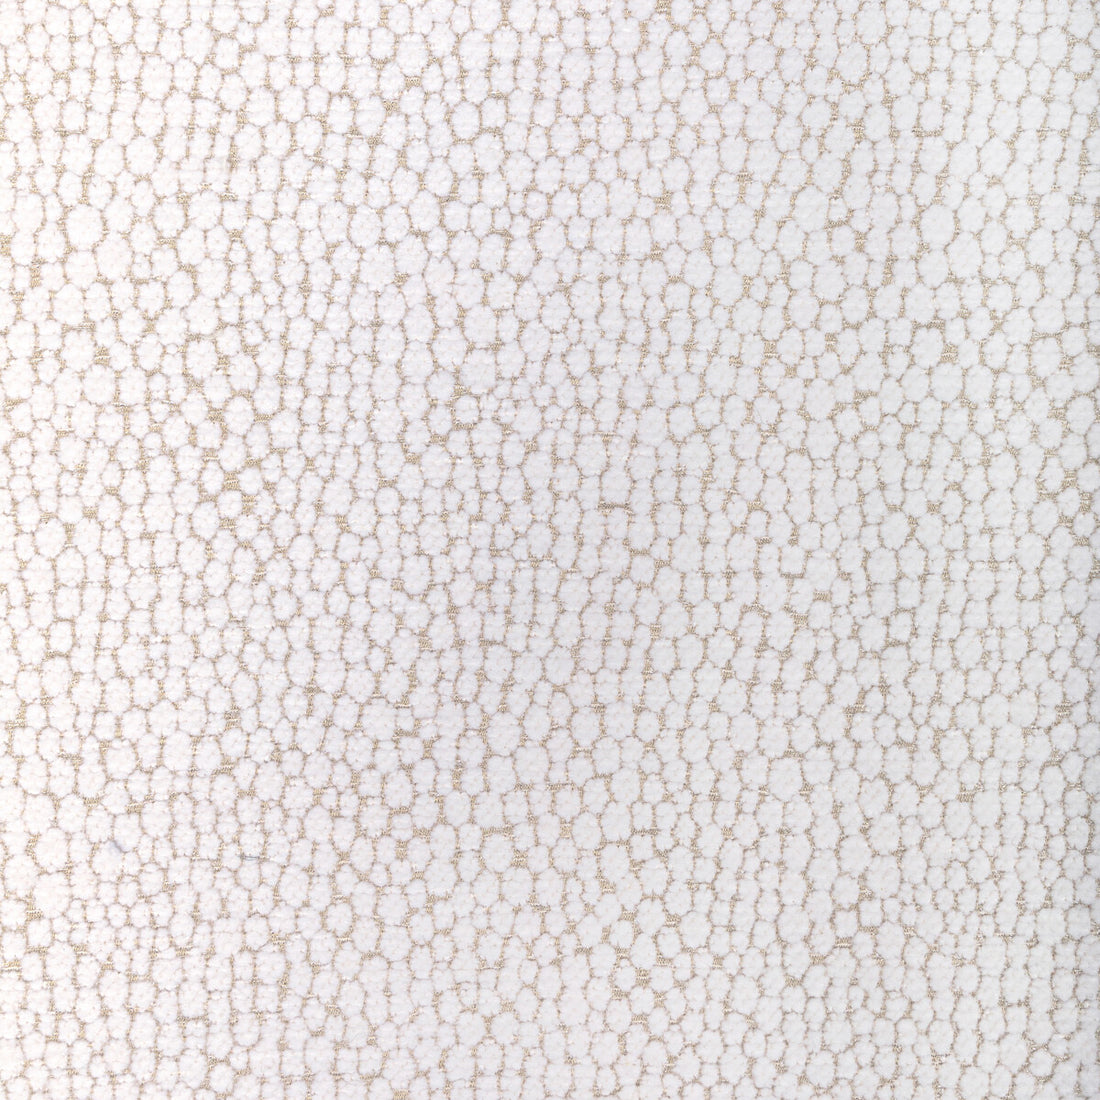 Starfall fabric in ivory silver color - pattern 36349.101.0 - by Kravet Couture in the Modern Luxe III collection